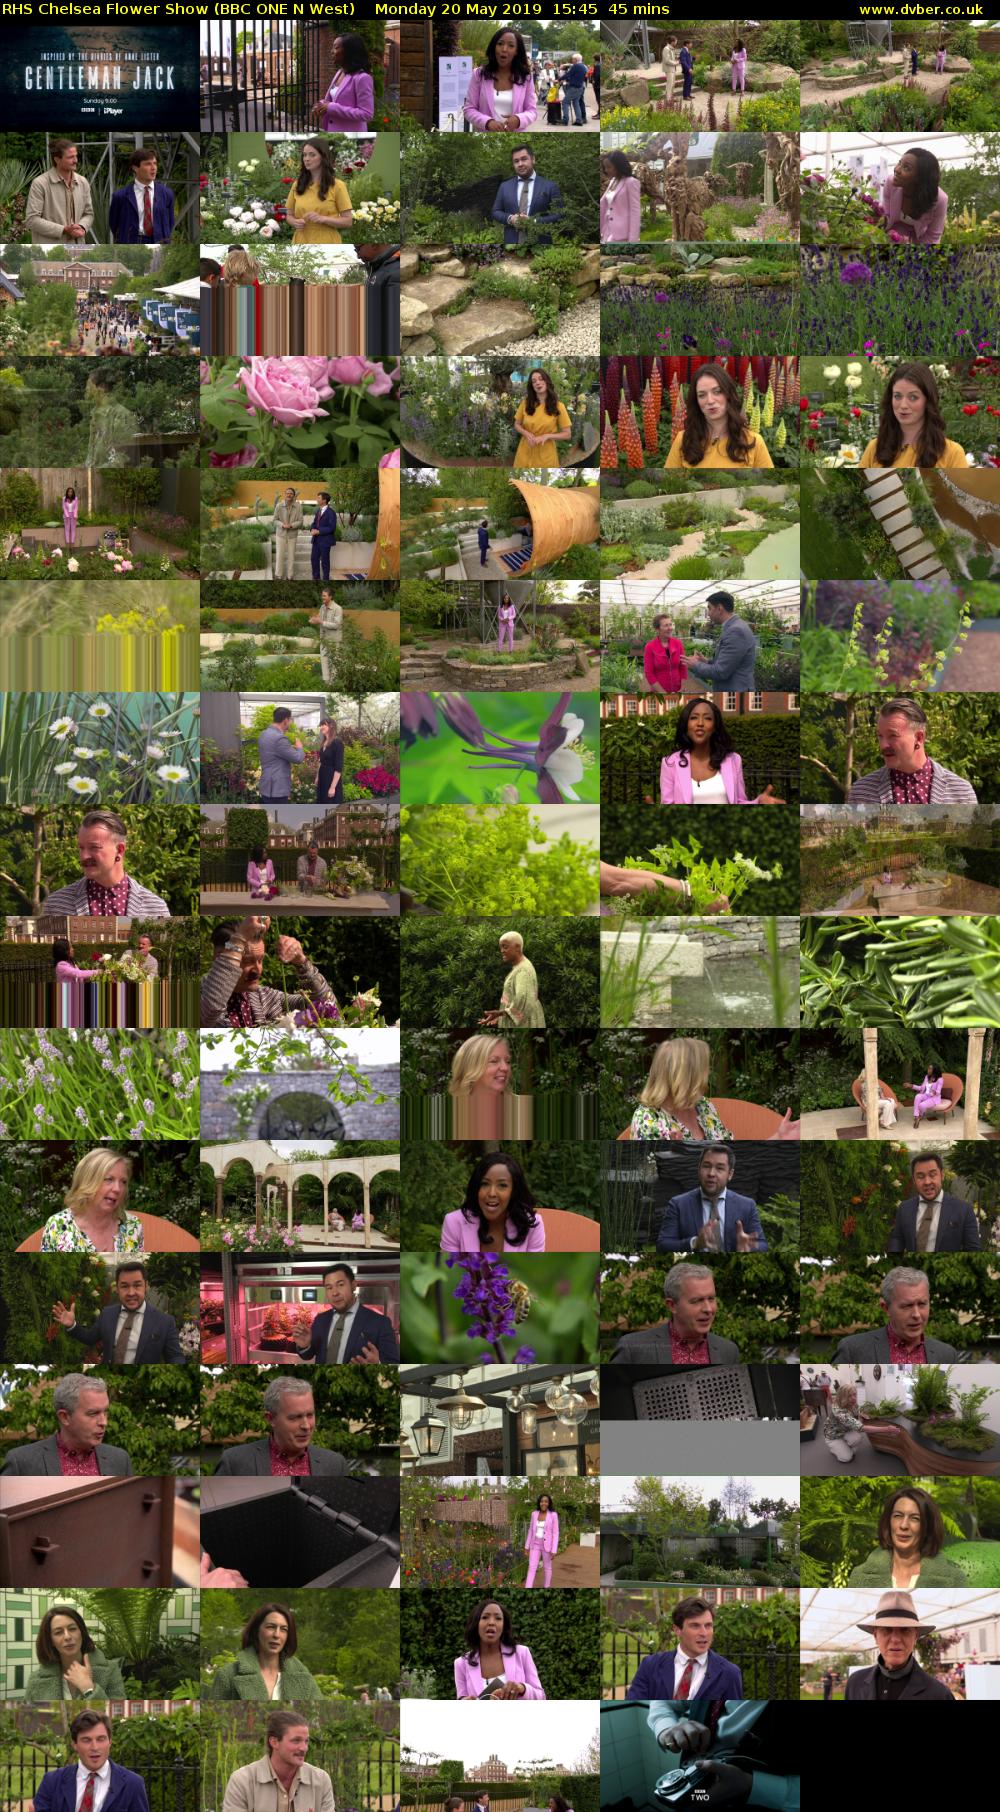 RHS Chelsea Flower Show (BBC ONE N West) Monday 20 May 2019 15:45 - 16:30